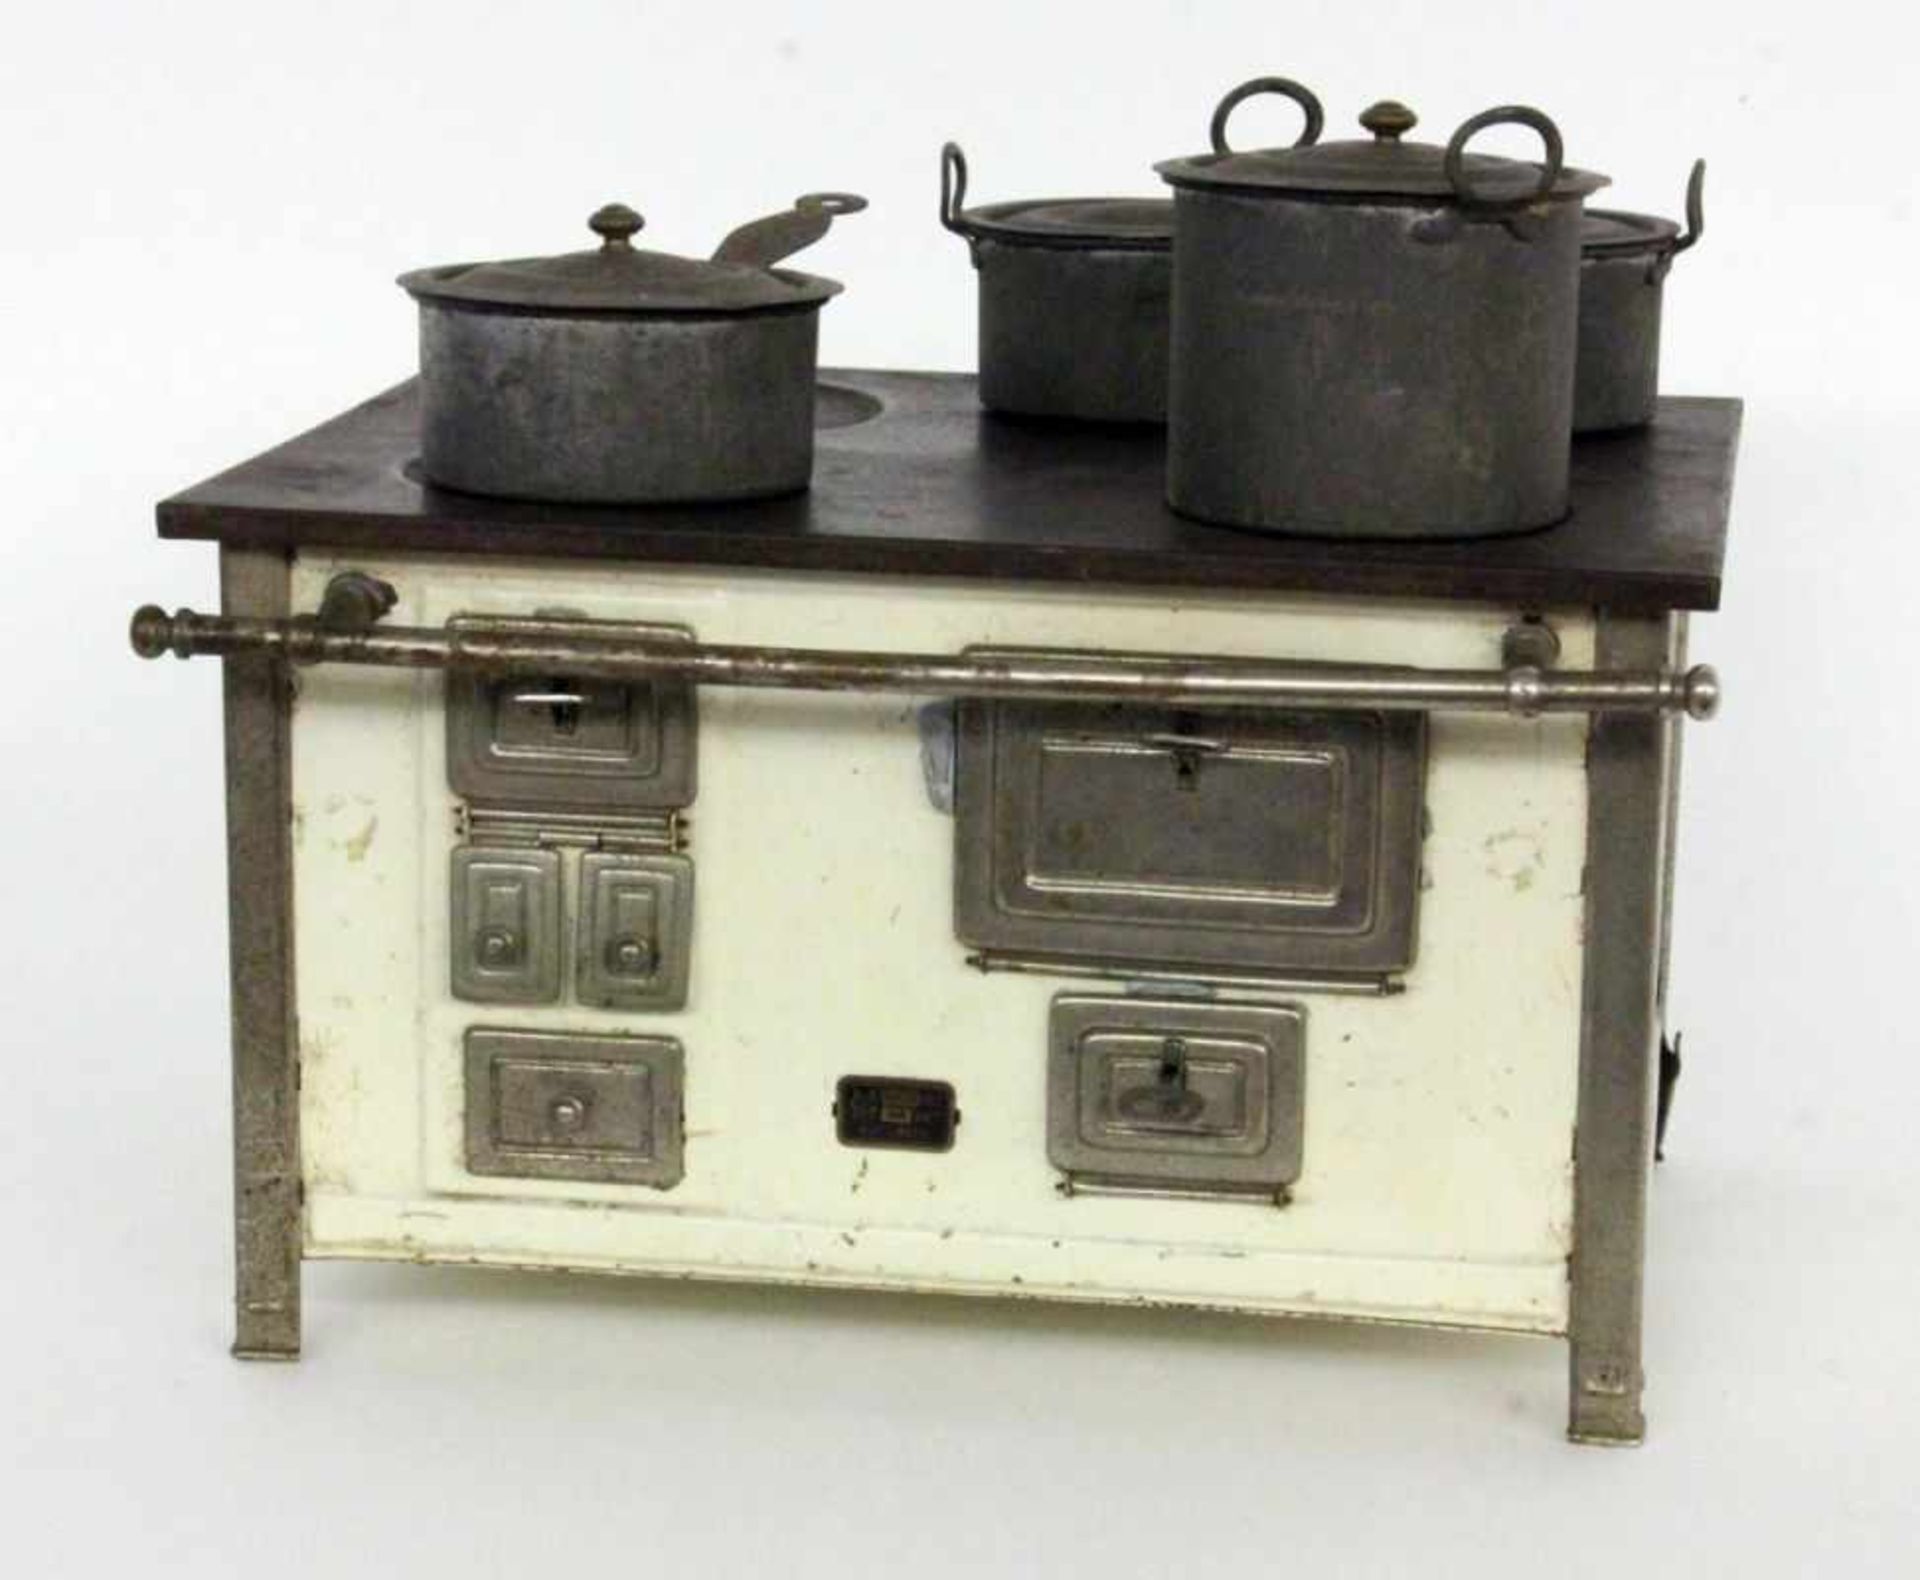 ''AN ELECTRIC MARKLIN CHILDREN'S STOVE 1920s Sheet metal, partly enamelled. Electrically